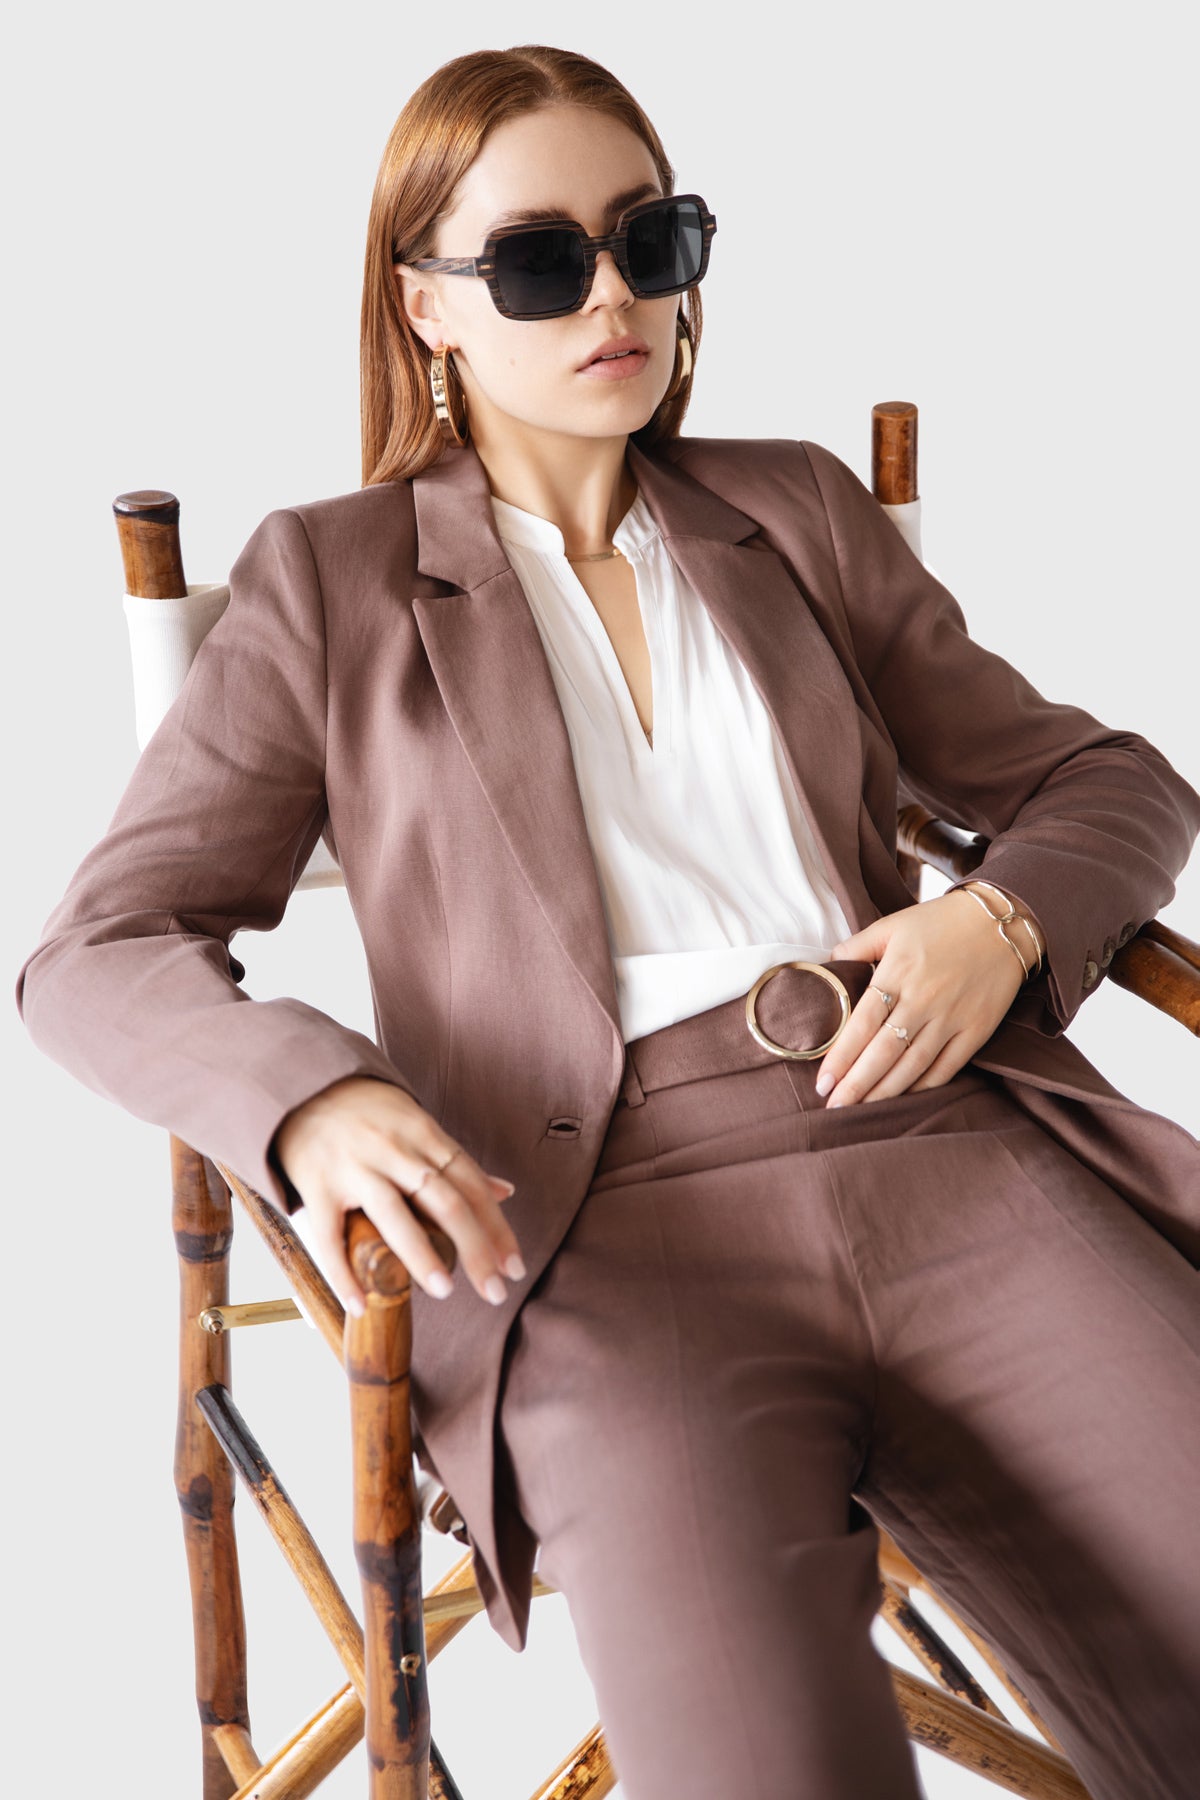 UV400 Oversized Squared Wood Sunglasses With Brown Suit